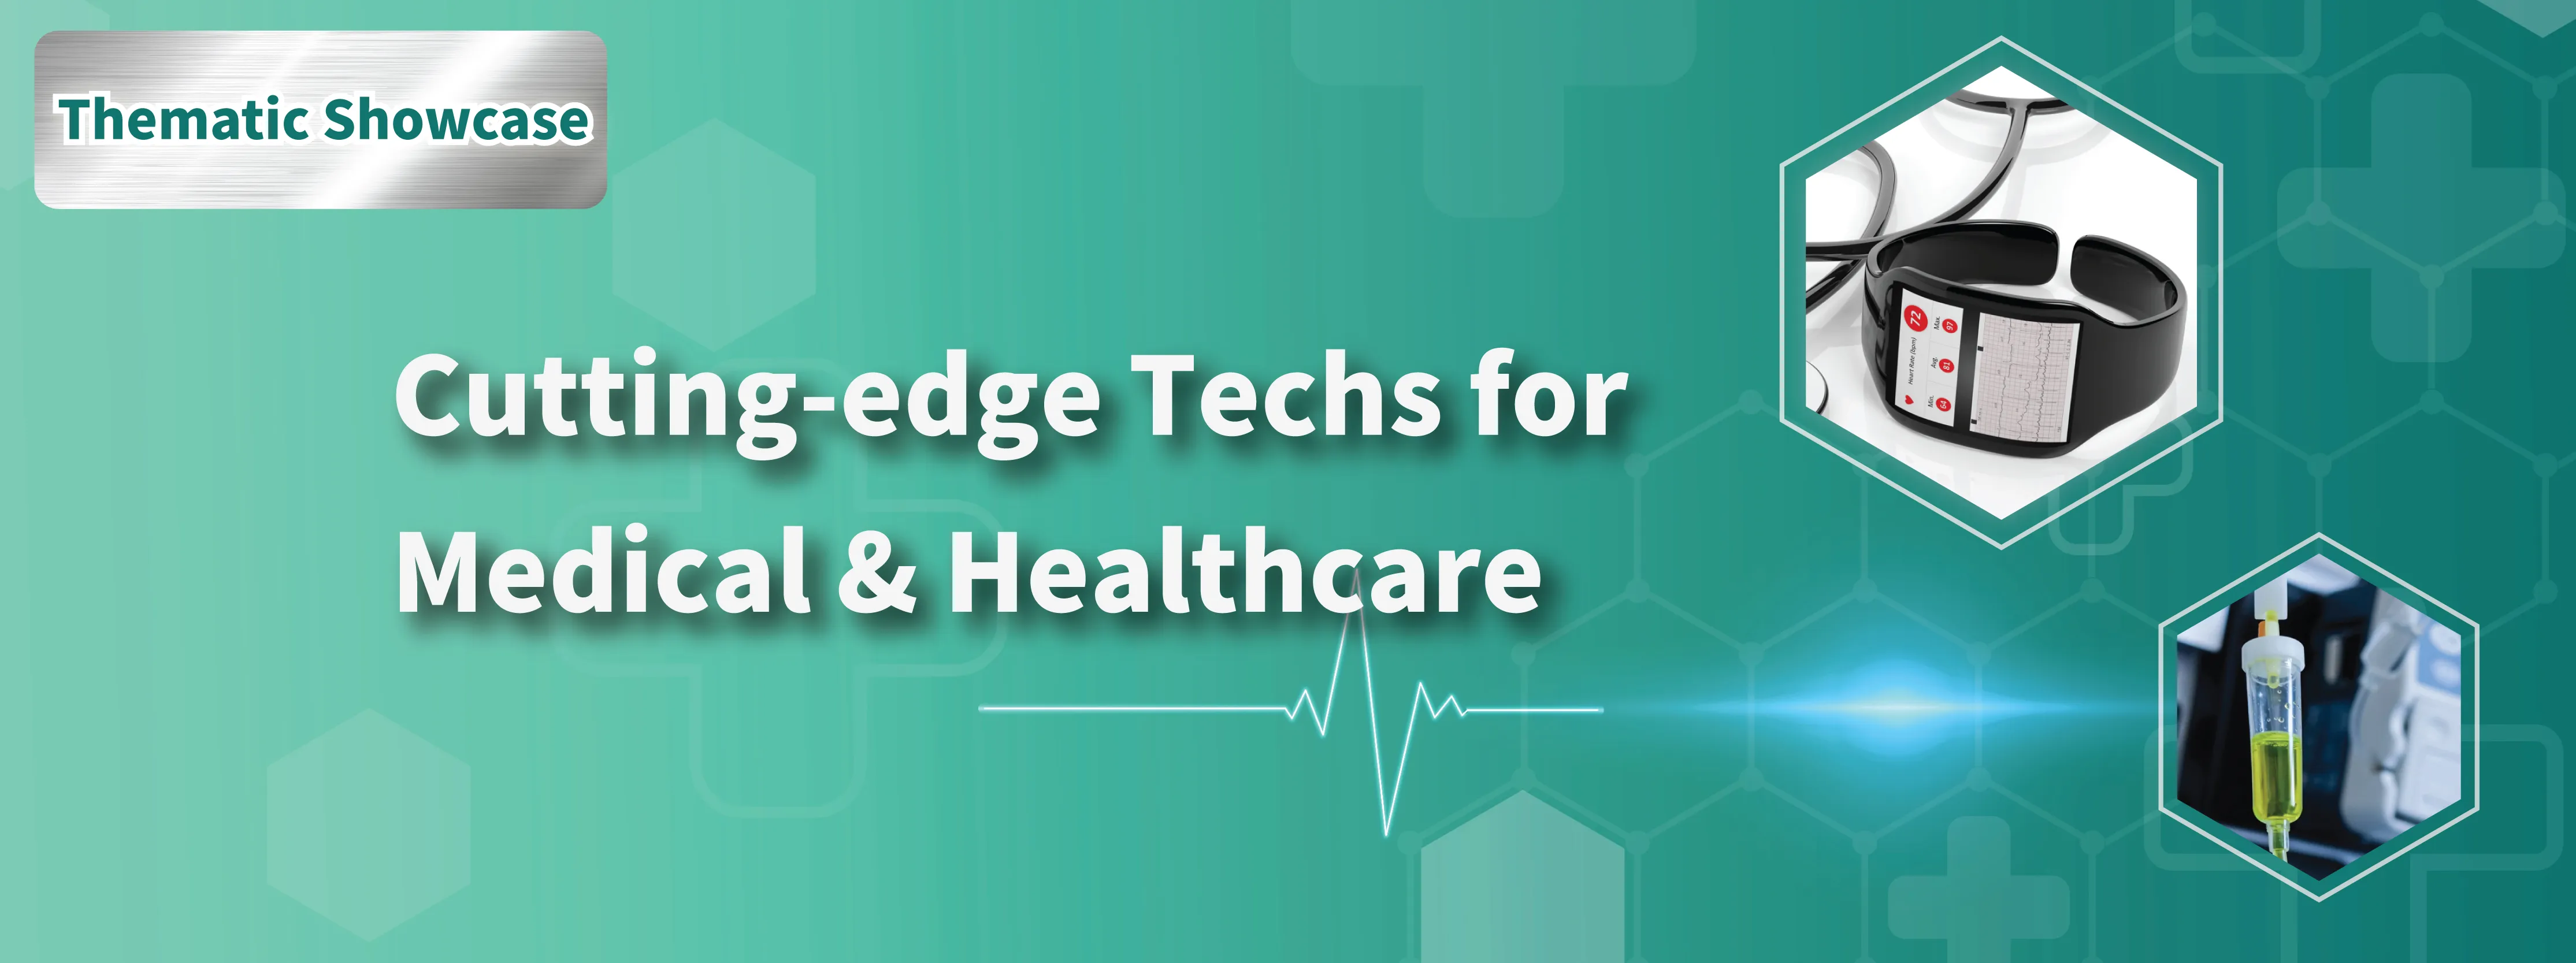 Cutting-edge Techs for Medical & Healthcare